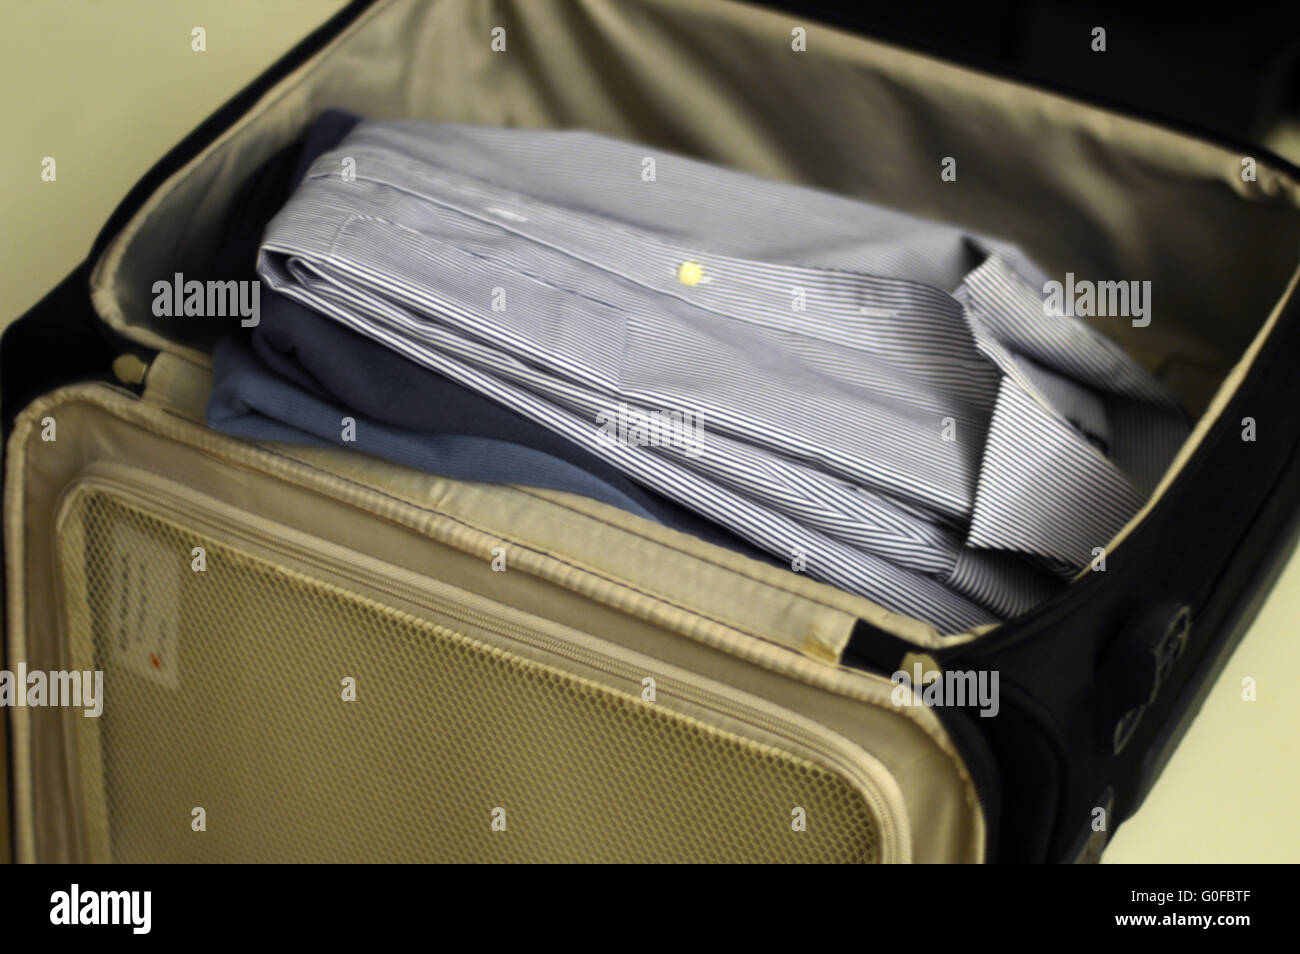 Packing the suitcase for a business trip Stock Photo